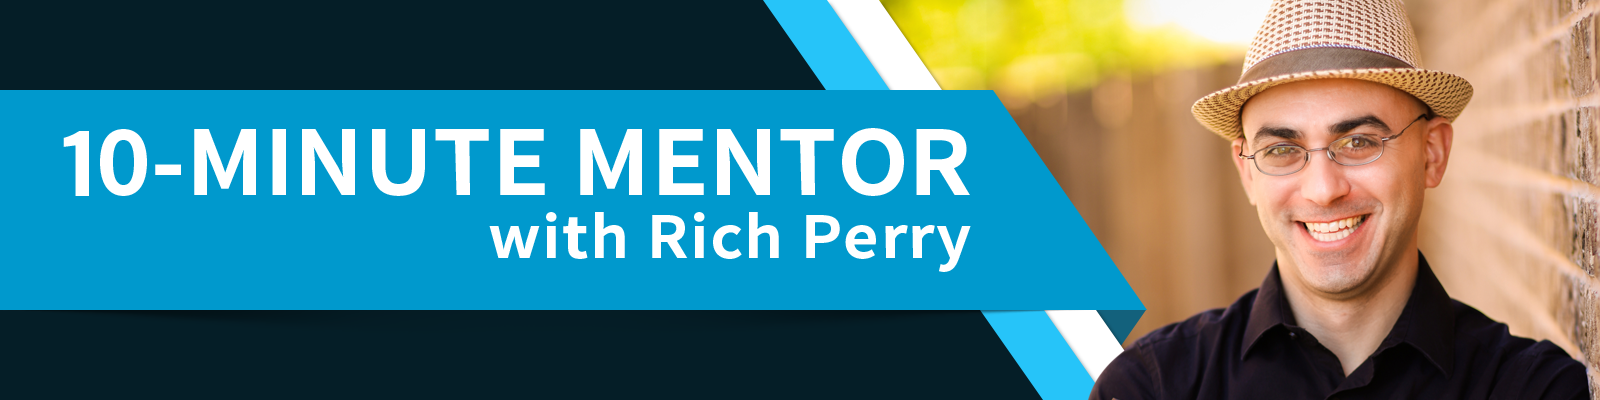 10 Minute Mentor with Rich Perry podcast image